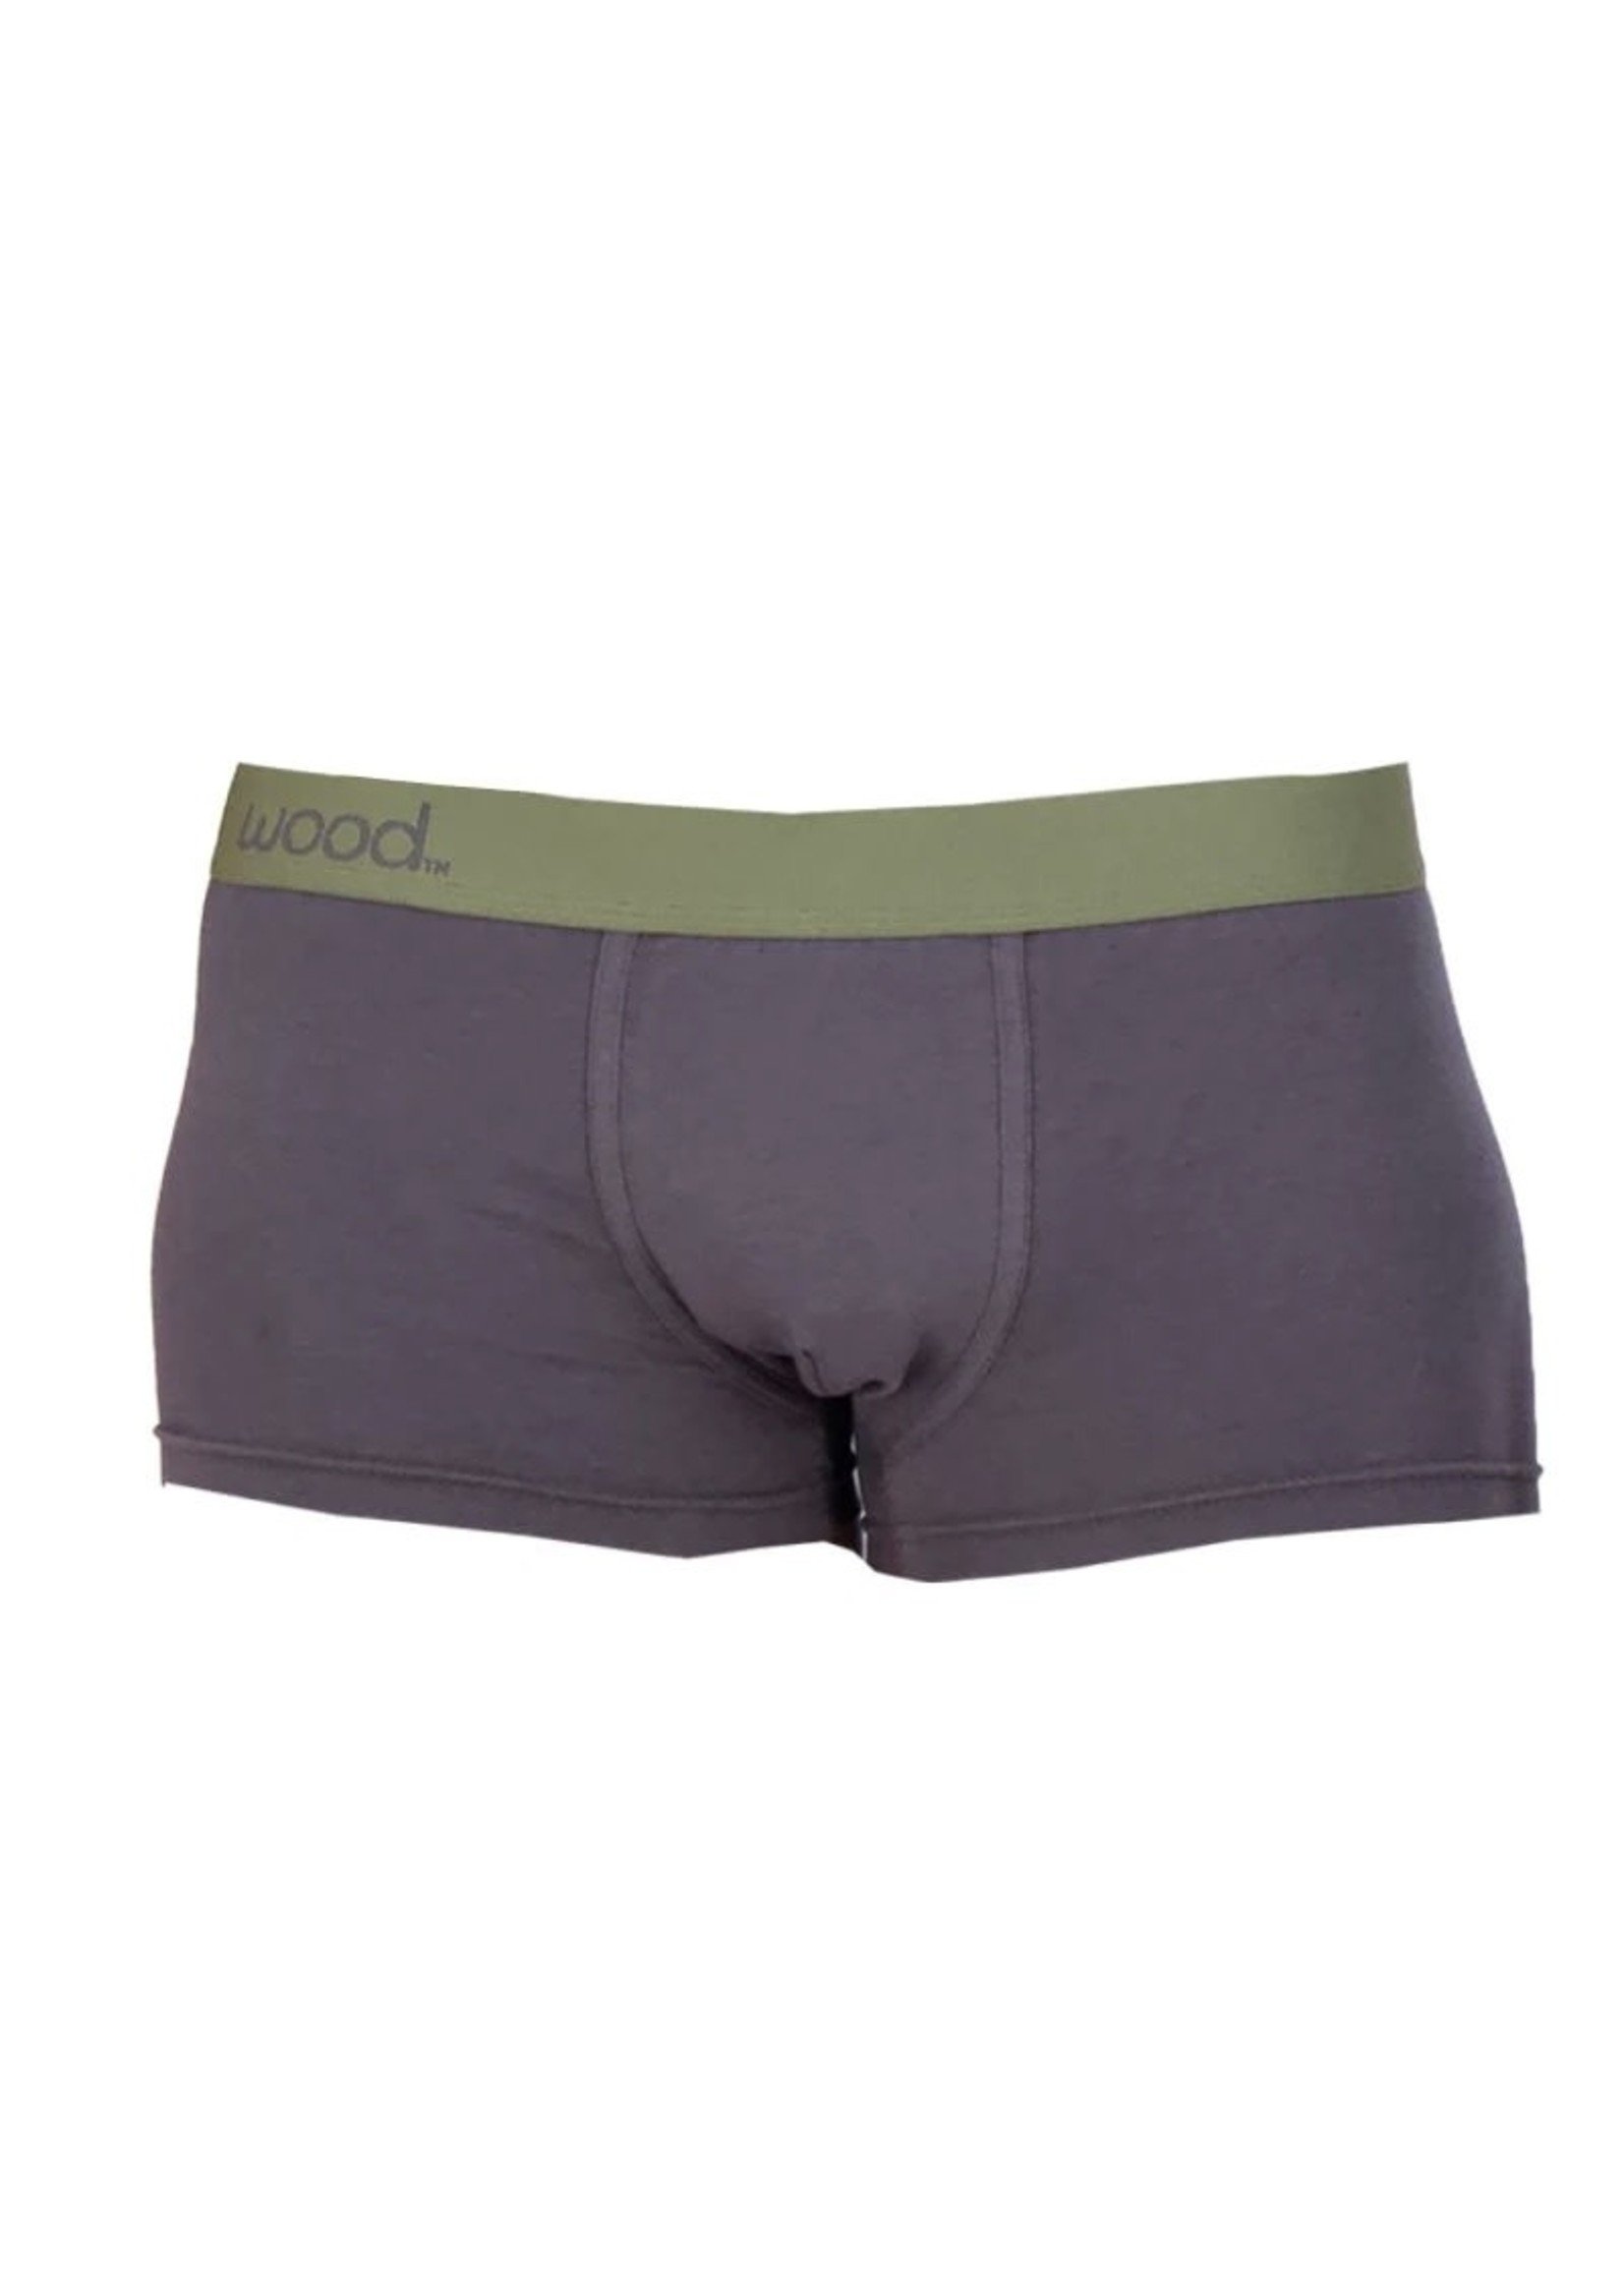 Wood Underwear Trunks - Solid Colour